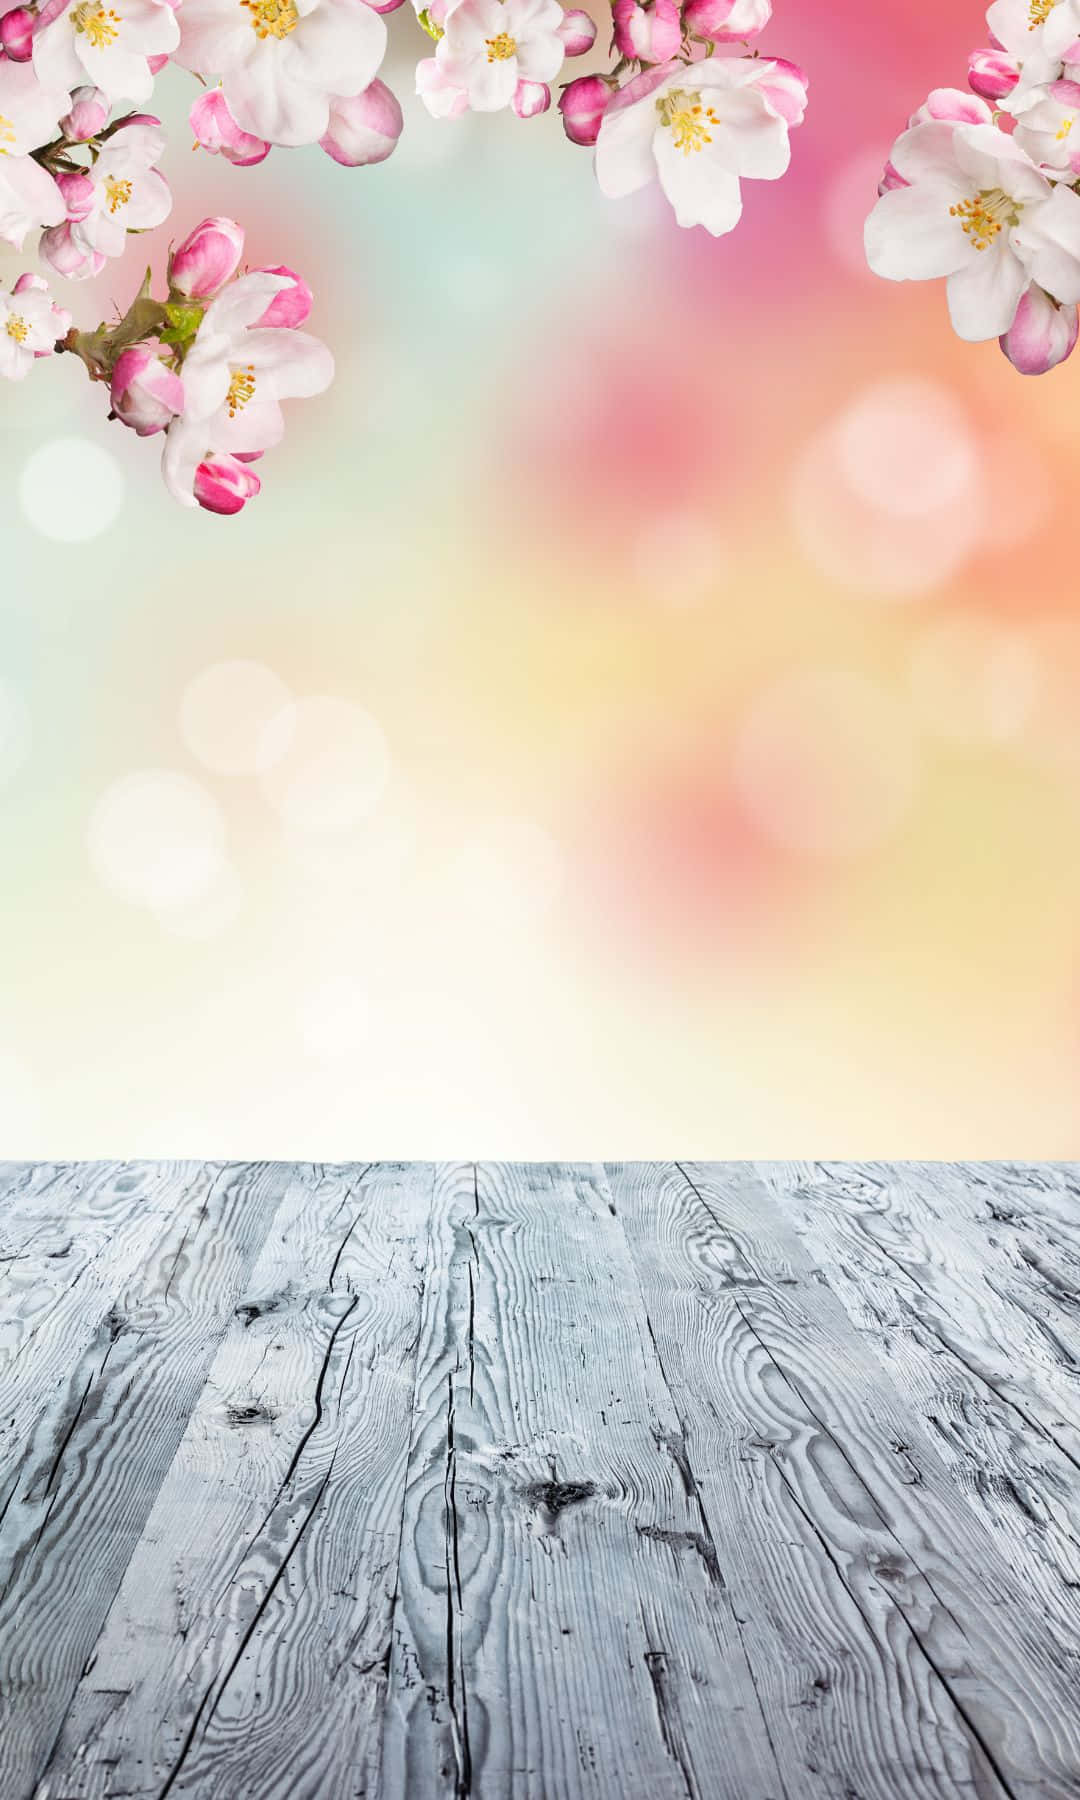 A Wooden Background With Cherry Blossoms And A Pink Sky Wallpaper